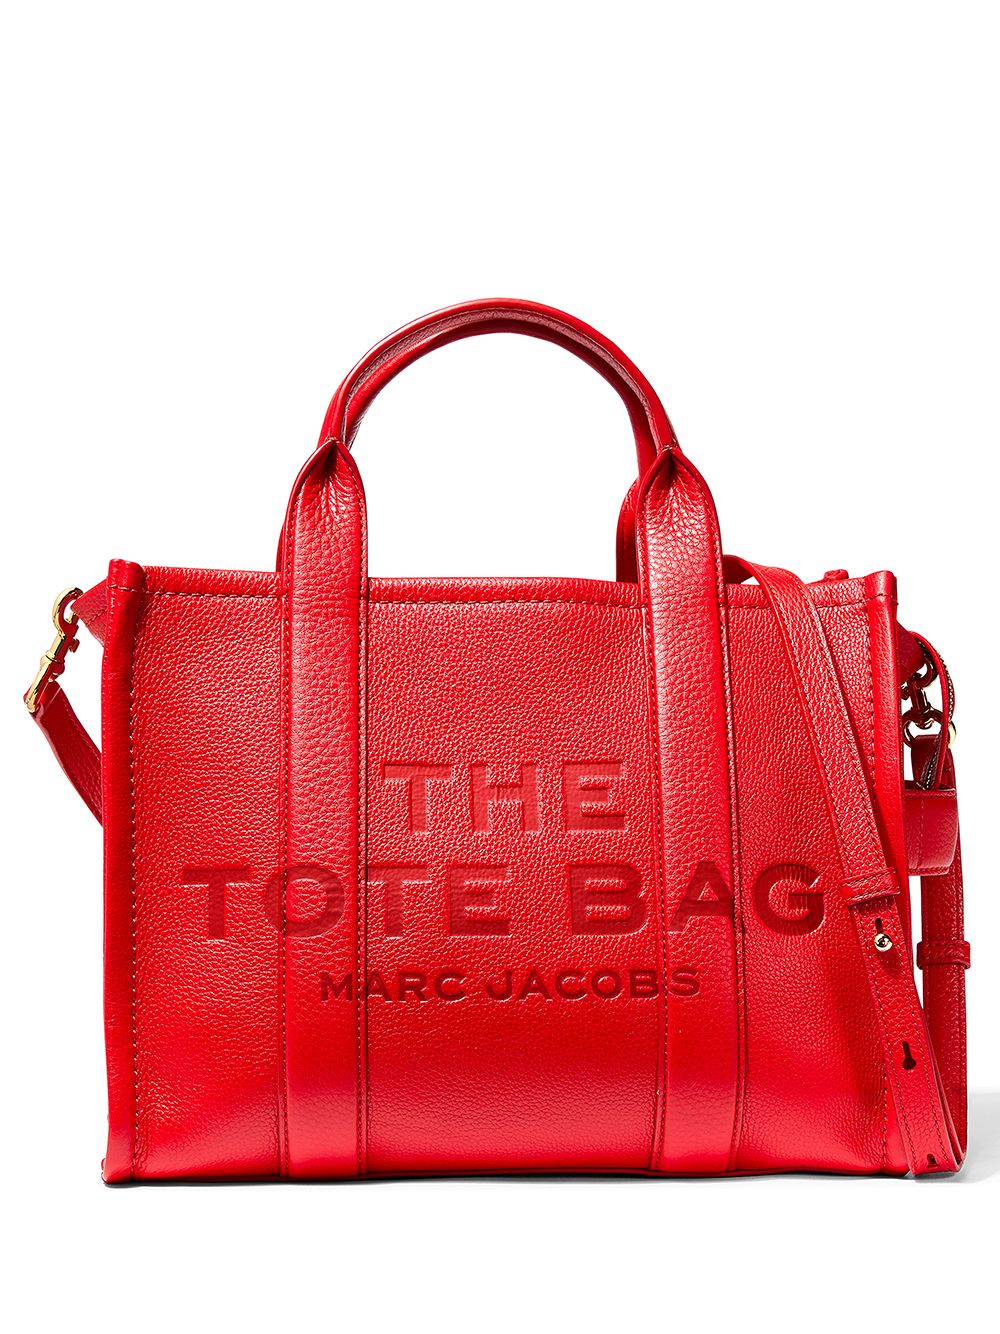 Marc Jacobs The Medium Tote bag - Red von Marc Jacobs